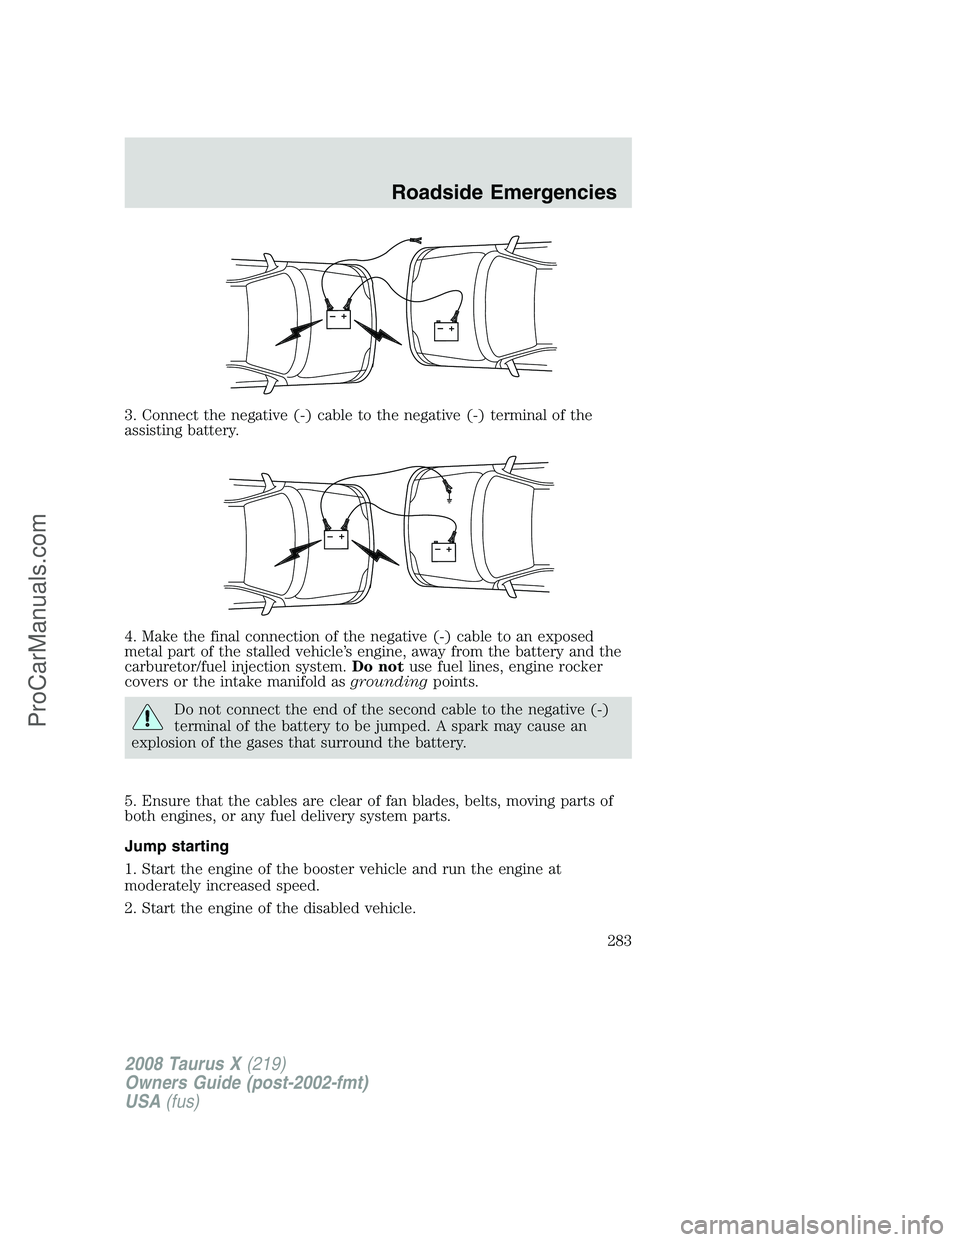 FORD FREESTYLE 2008  Owners Manual 3. Connect the negative (-) cable to the negative (-) terminal of the
assisting battery.
4. Make the final connection of the negative (-) cable to an exposed
metal part of the stalled vehicle’s engi